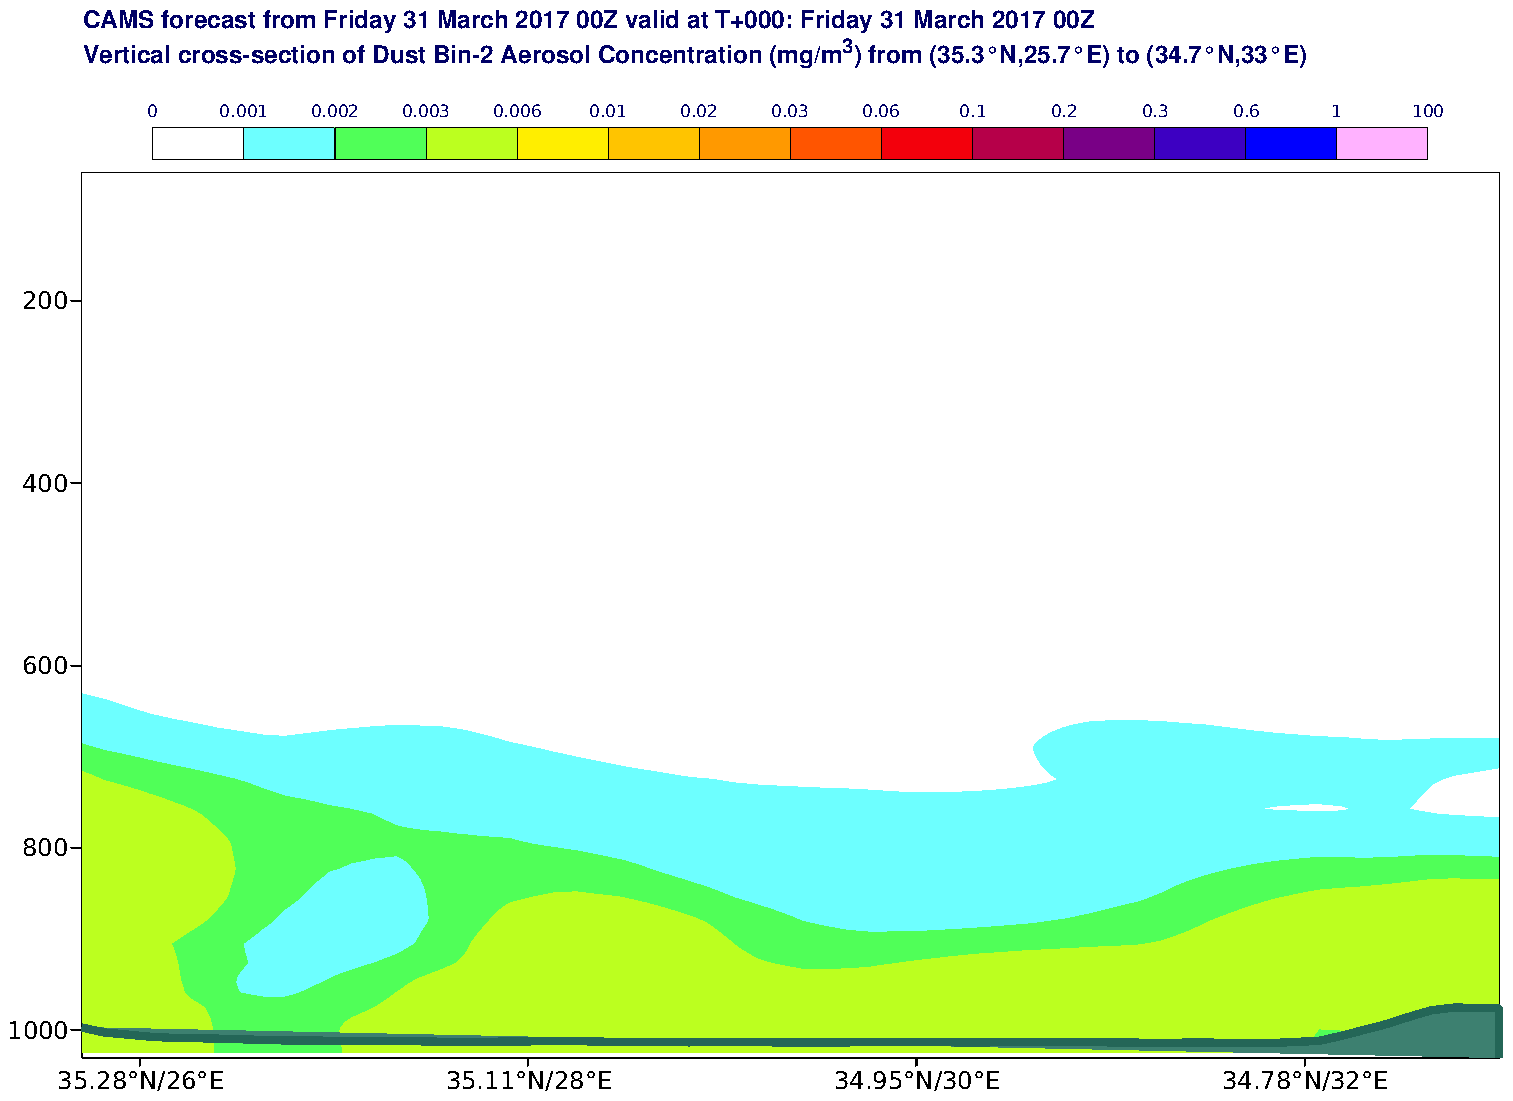 Vertical cross-section of Dust Bin-2 Aerosol Concentration (mg/m3) valid at T0 - 2017-03-31 00:00